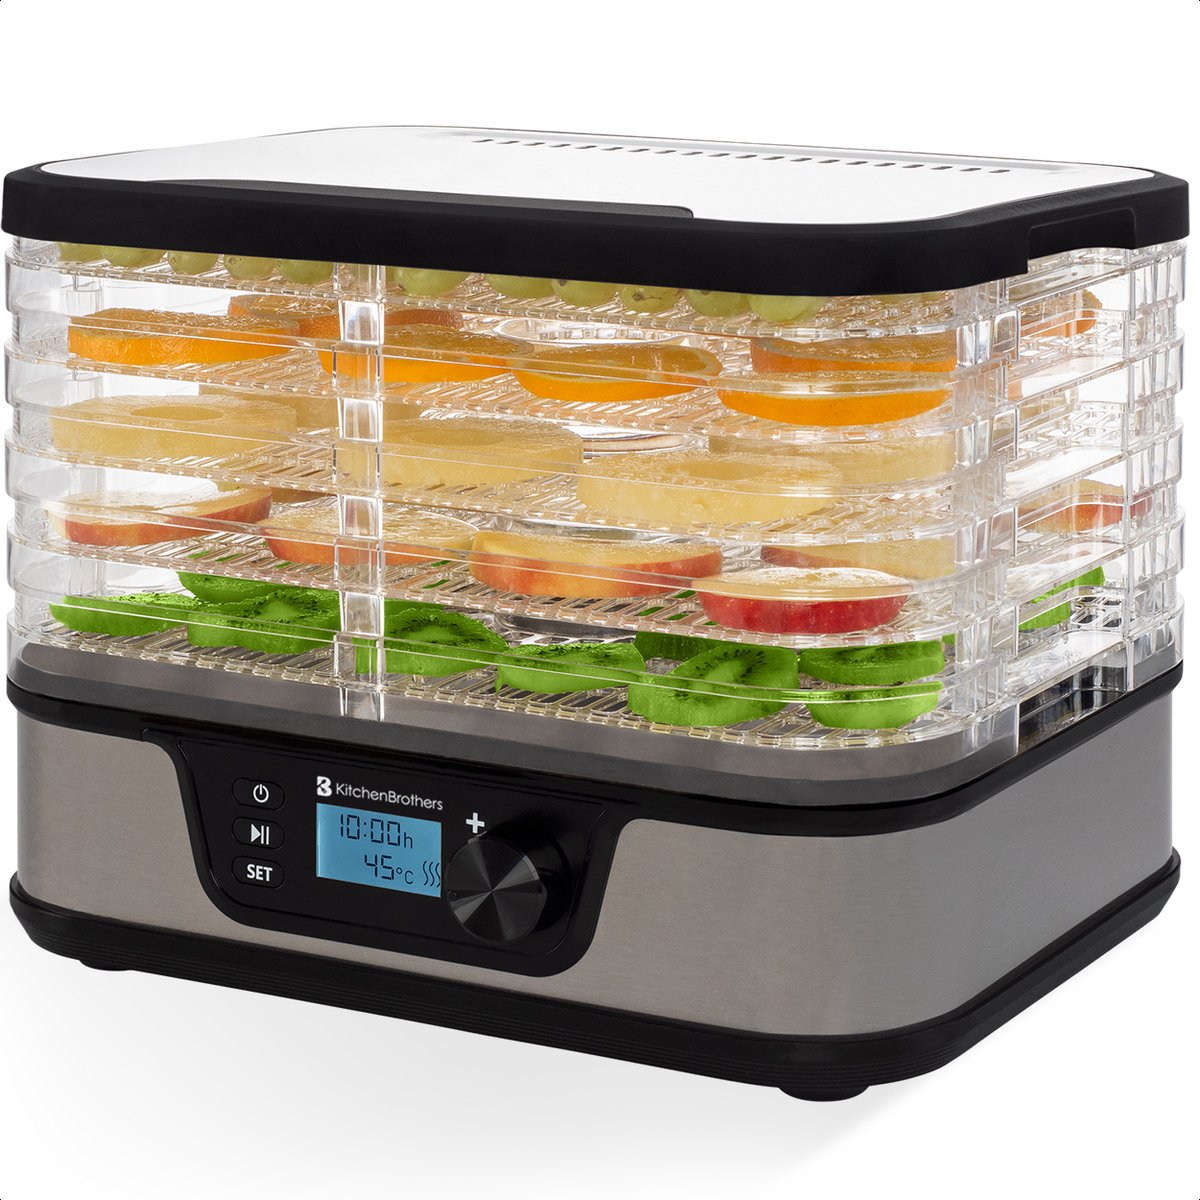 KitchenBrothers Voedseldroger - Elektrisch 380W Dehydrator - 5 Laags  Droogoven - 9... | bol.com